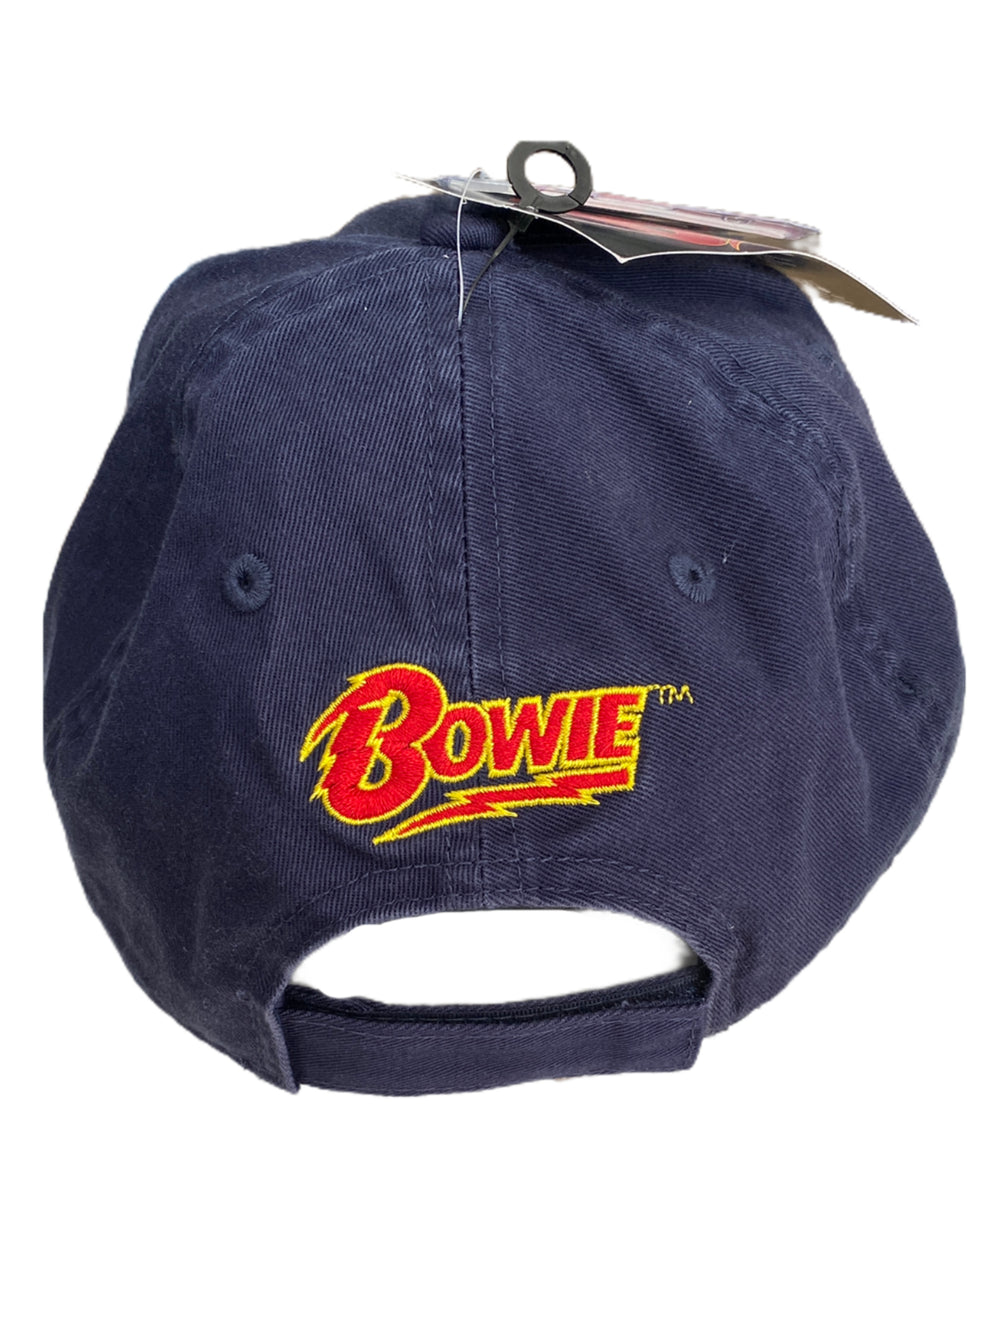 David Bowie Official Embroidered Peak Cap Adjustable Brand New Flash Logo Navy